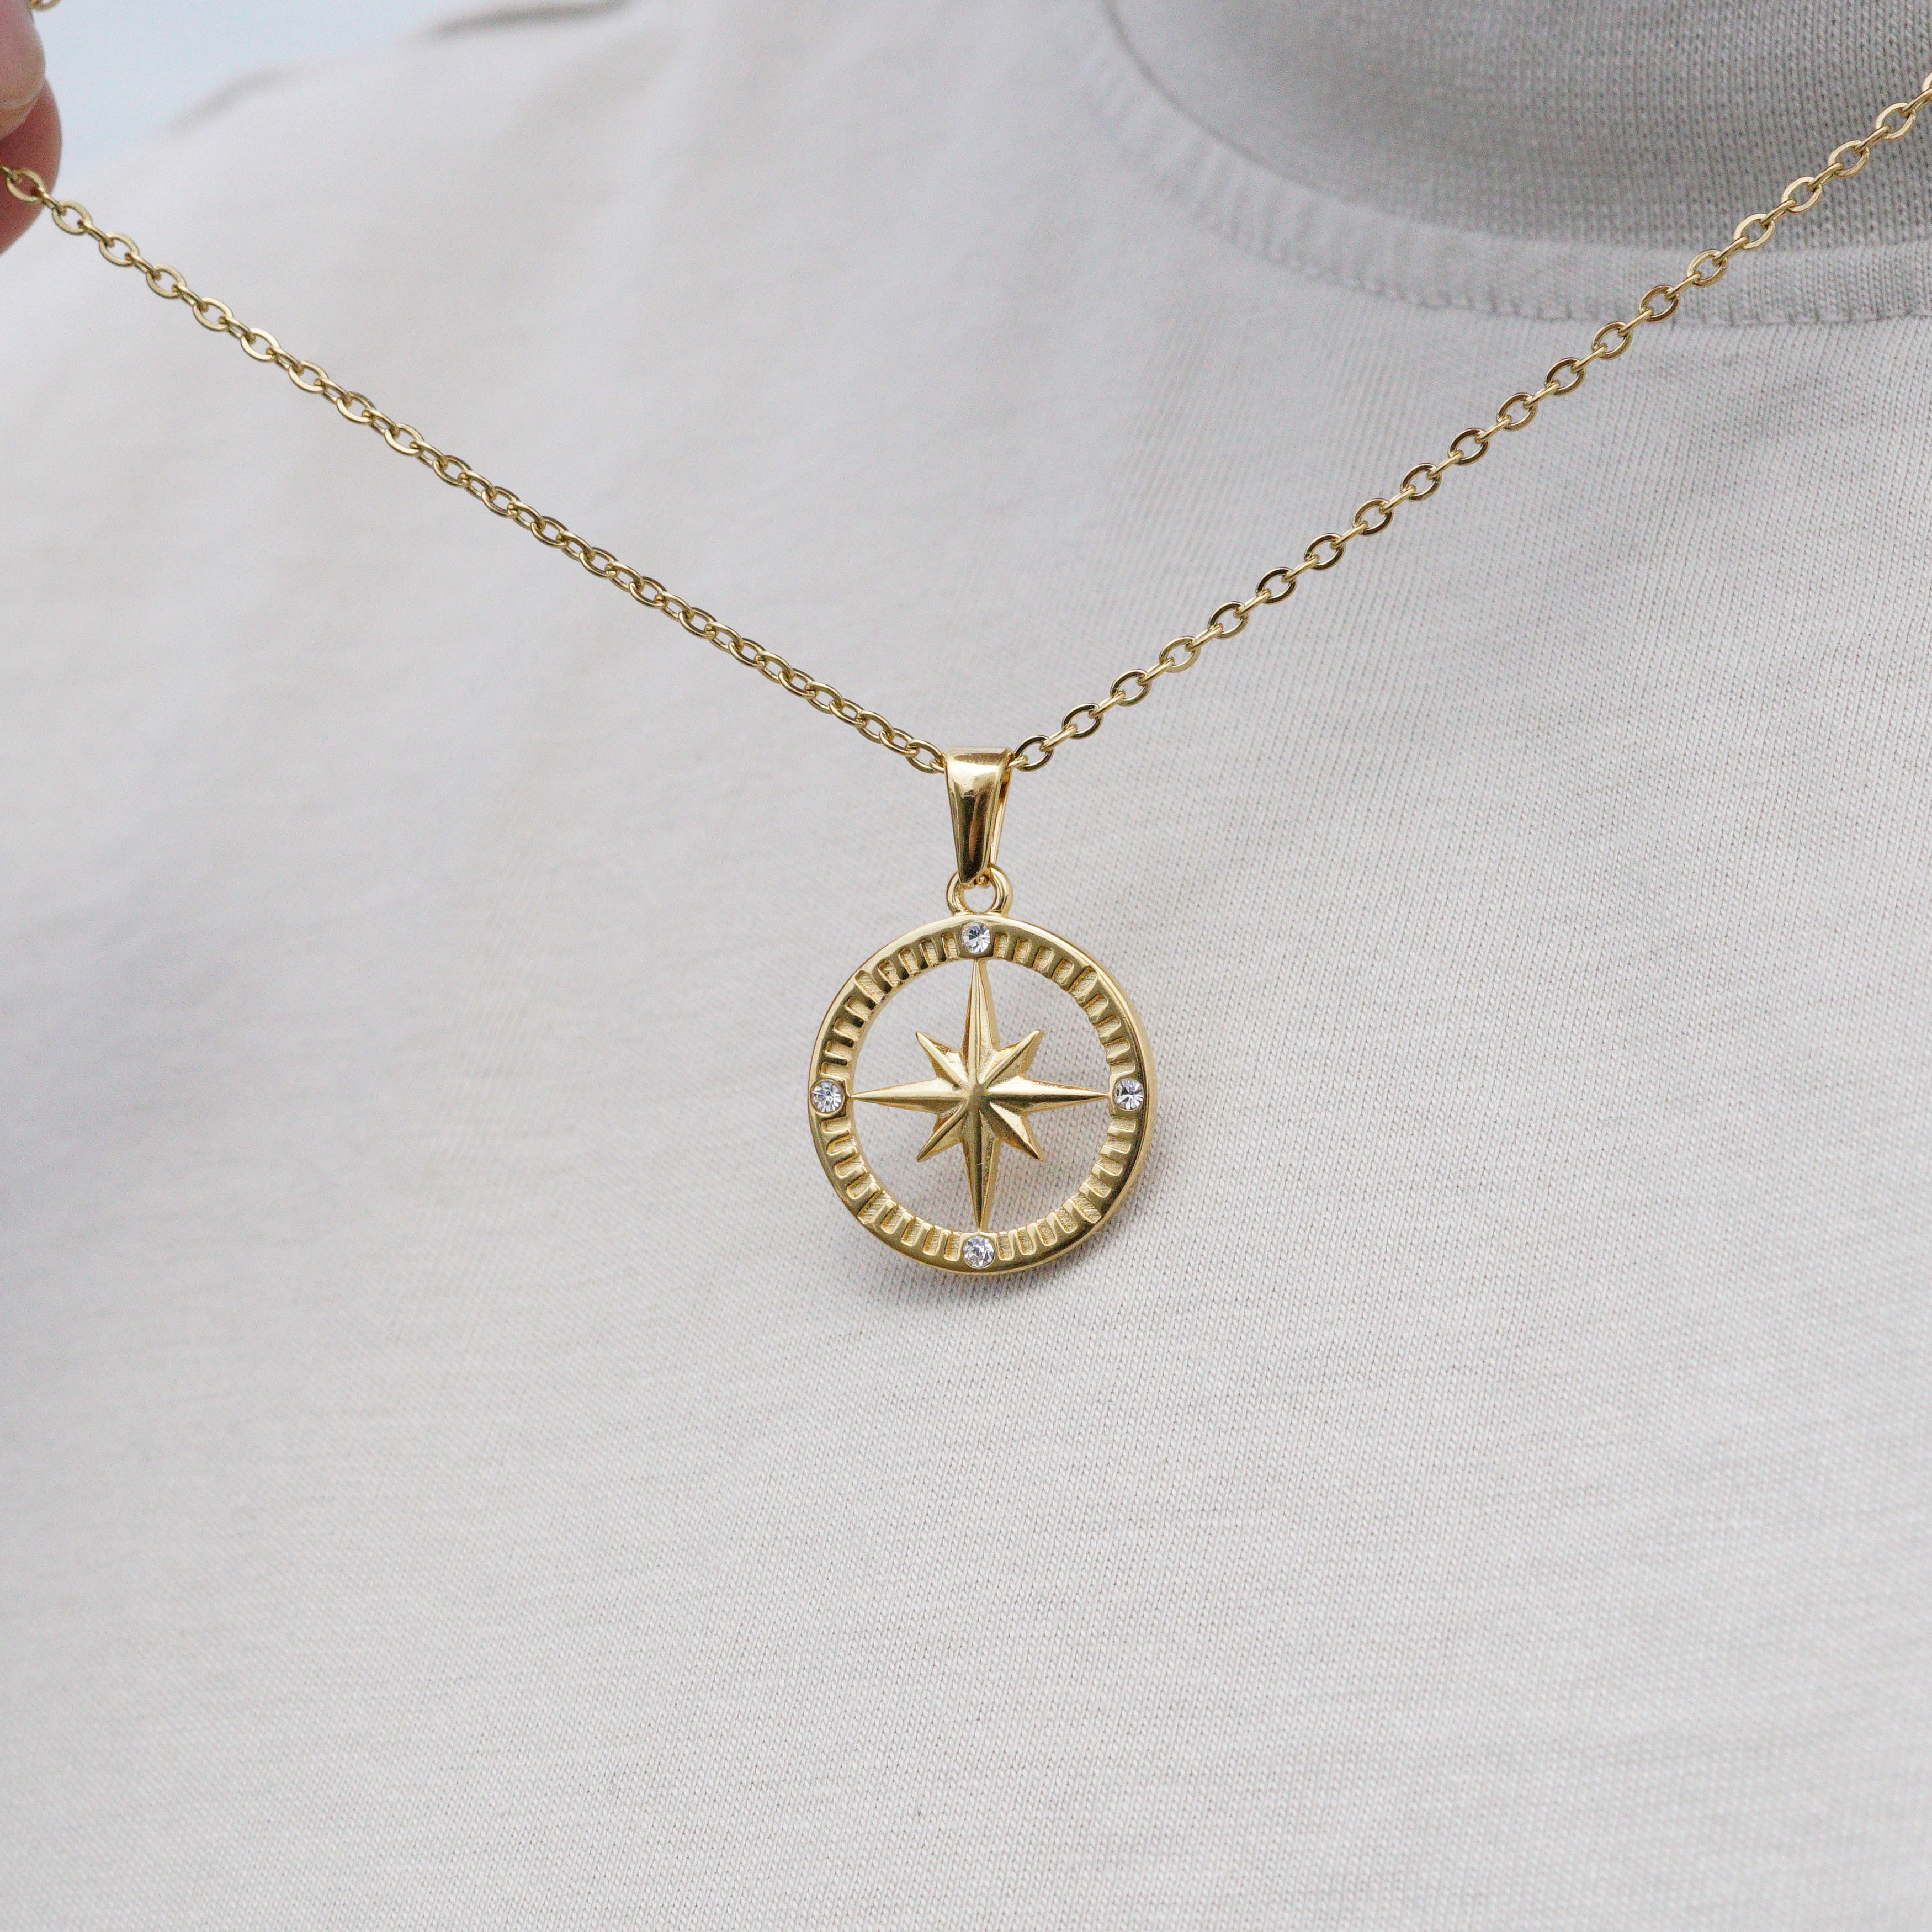 NORTH STAR NECKLACE - GOLD TONE